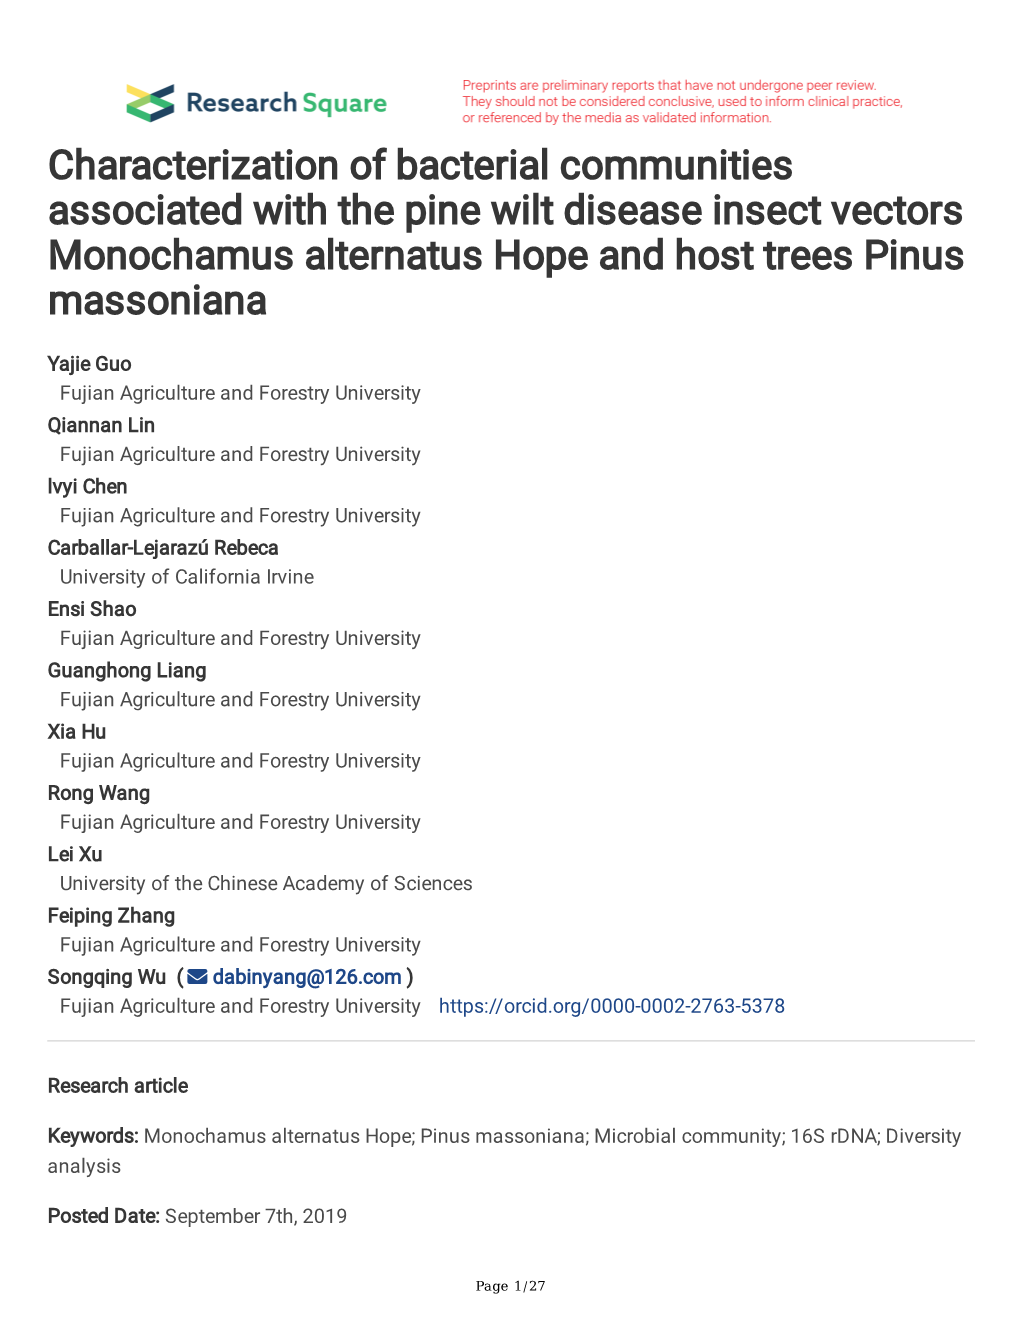 Characterization of Bacterial Communities Associated with the Pine Wilt Disease Insect Vectors Monochamus Alternatus Hope and Host Trees Pinus Massoniana